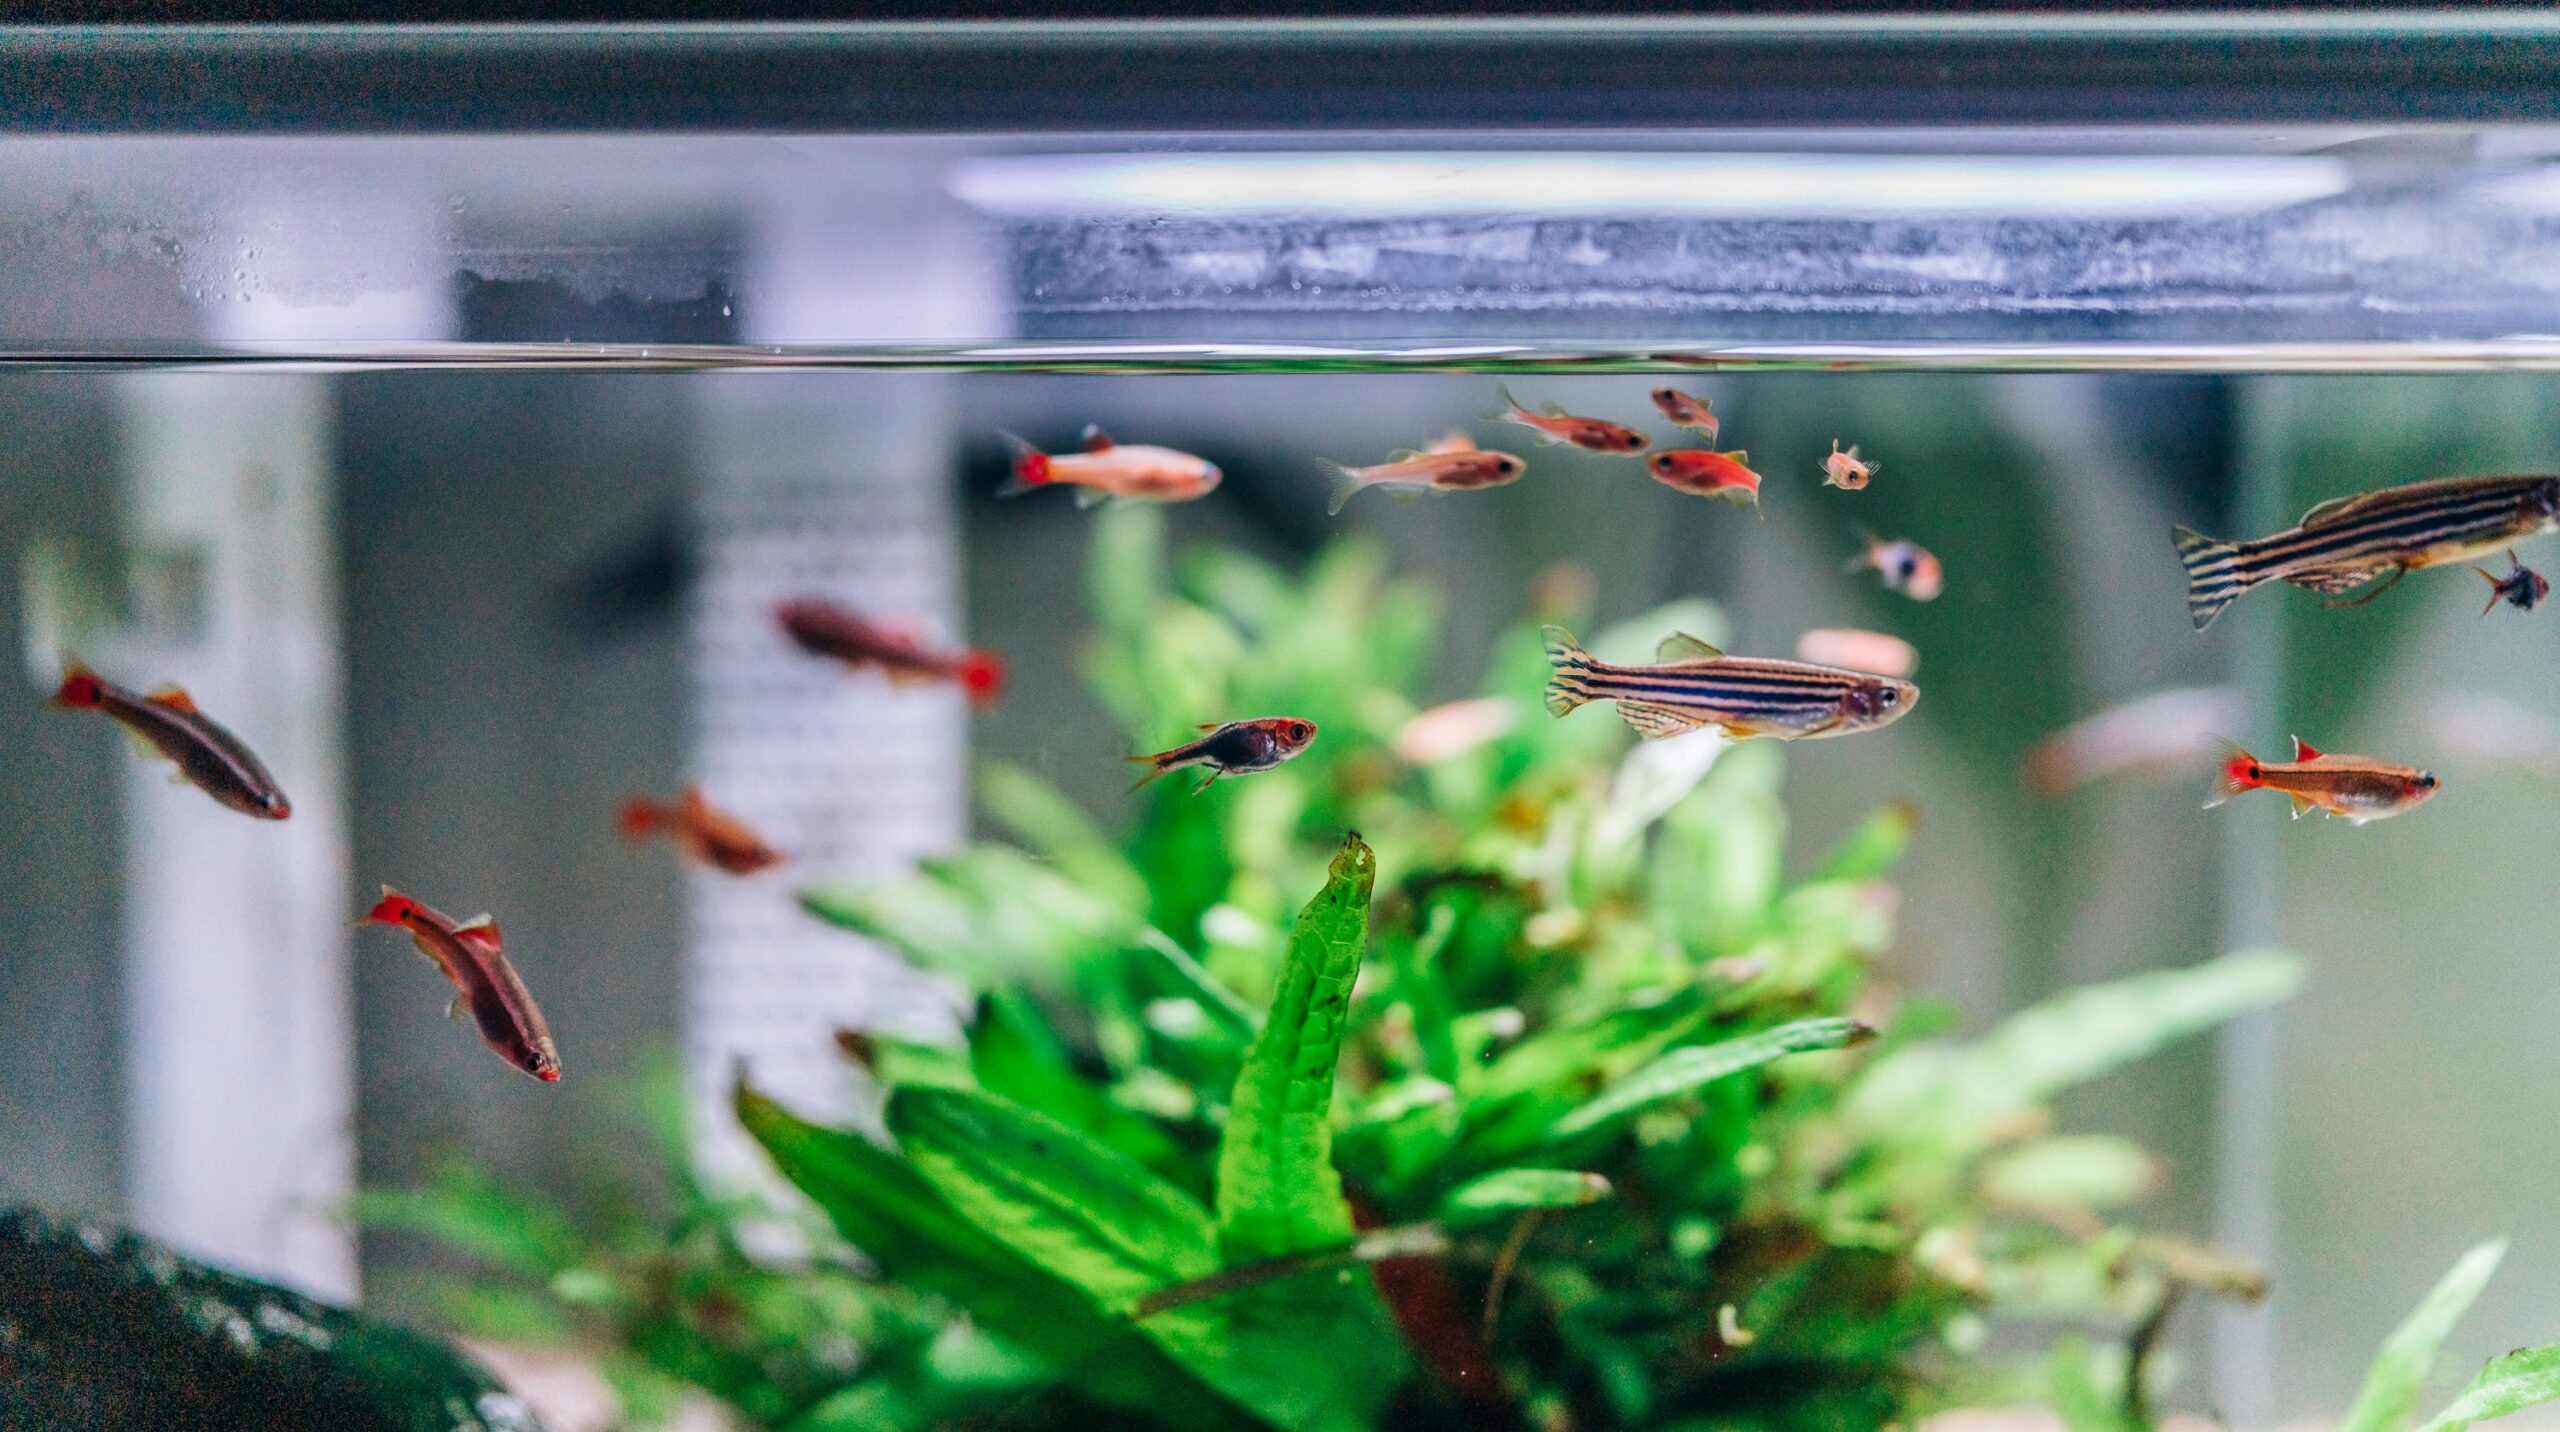 How do I maintain proper water quality in my aquarium?